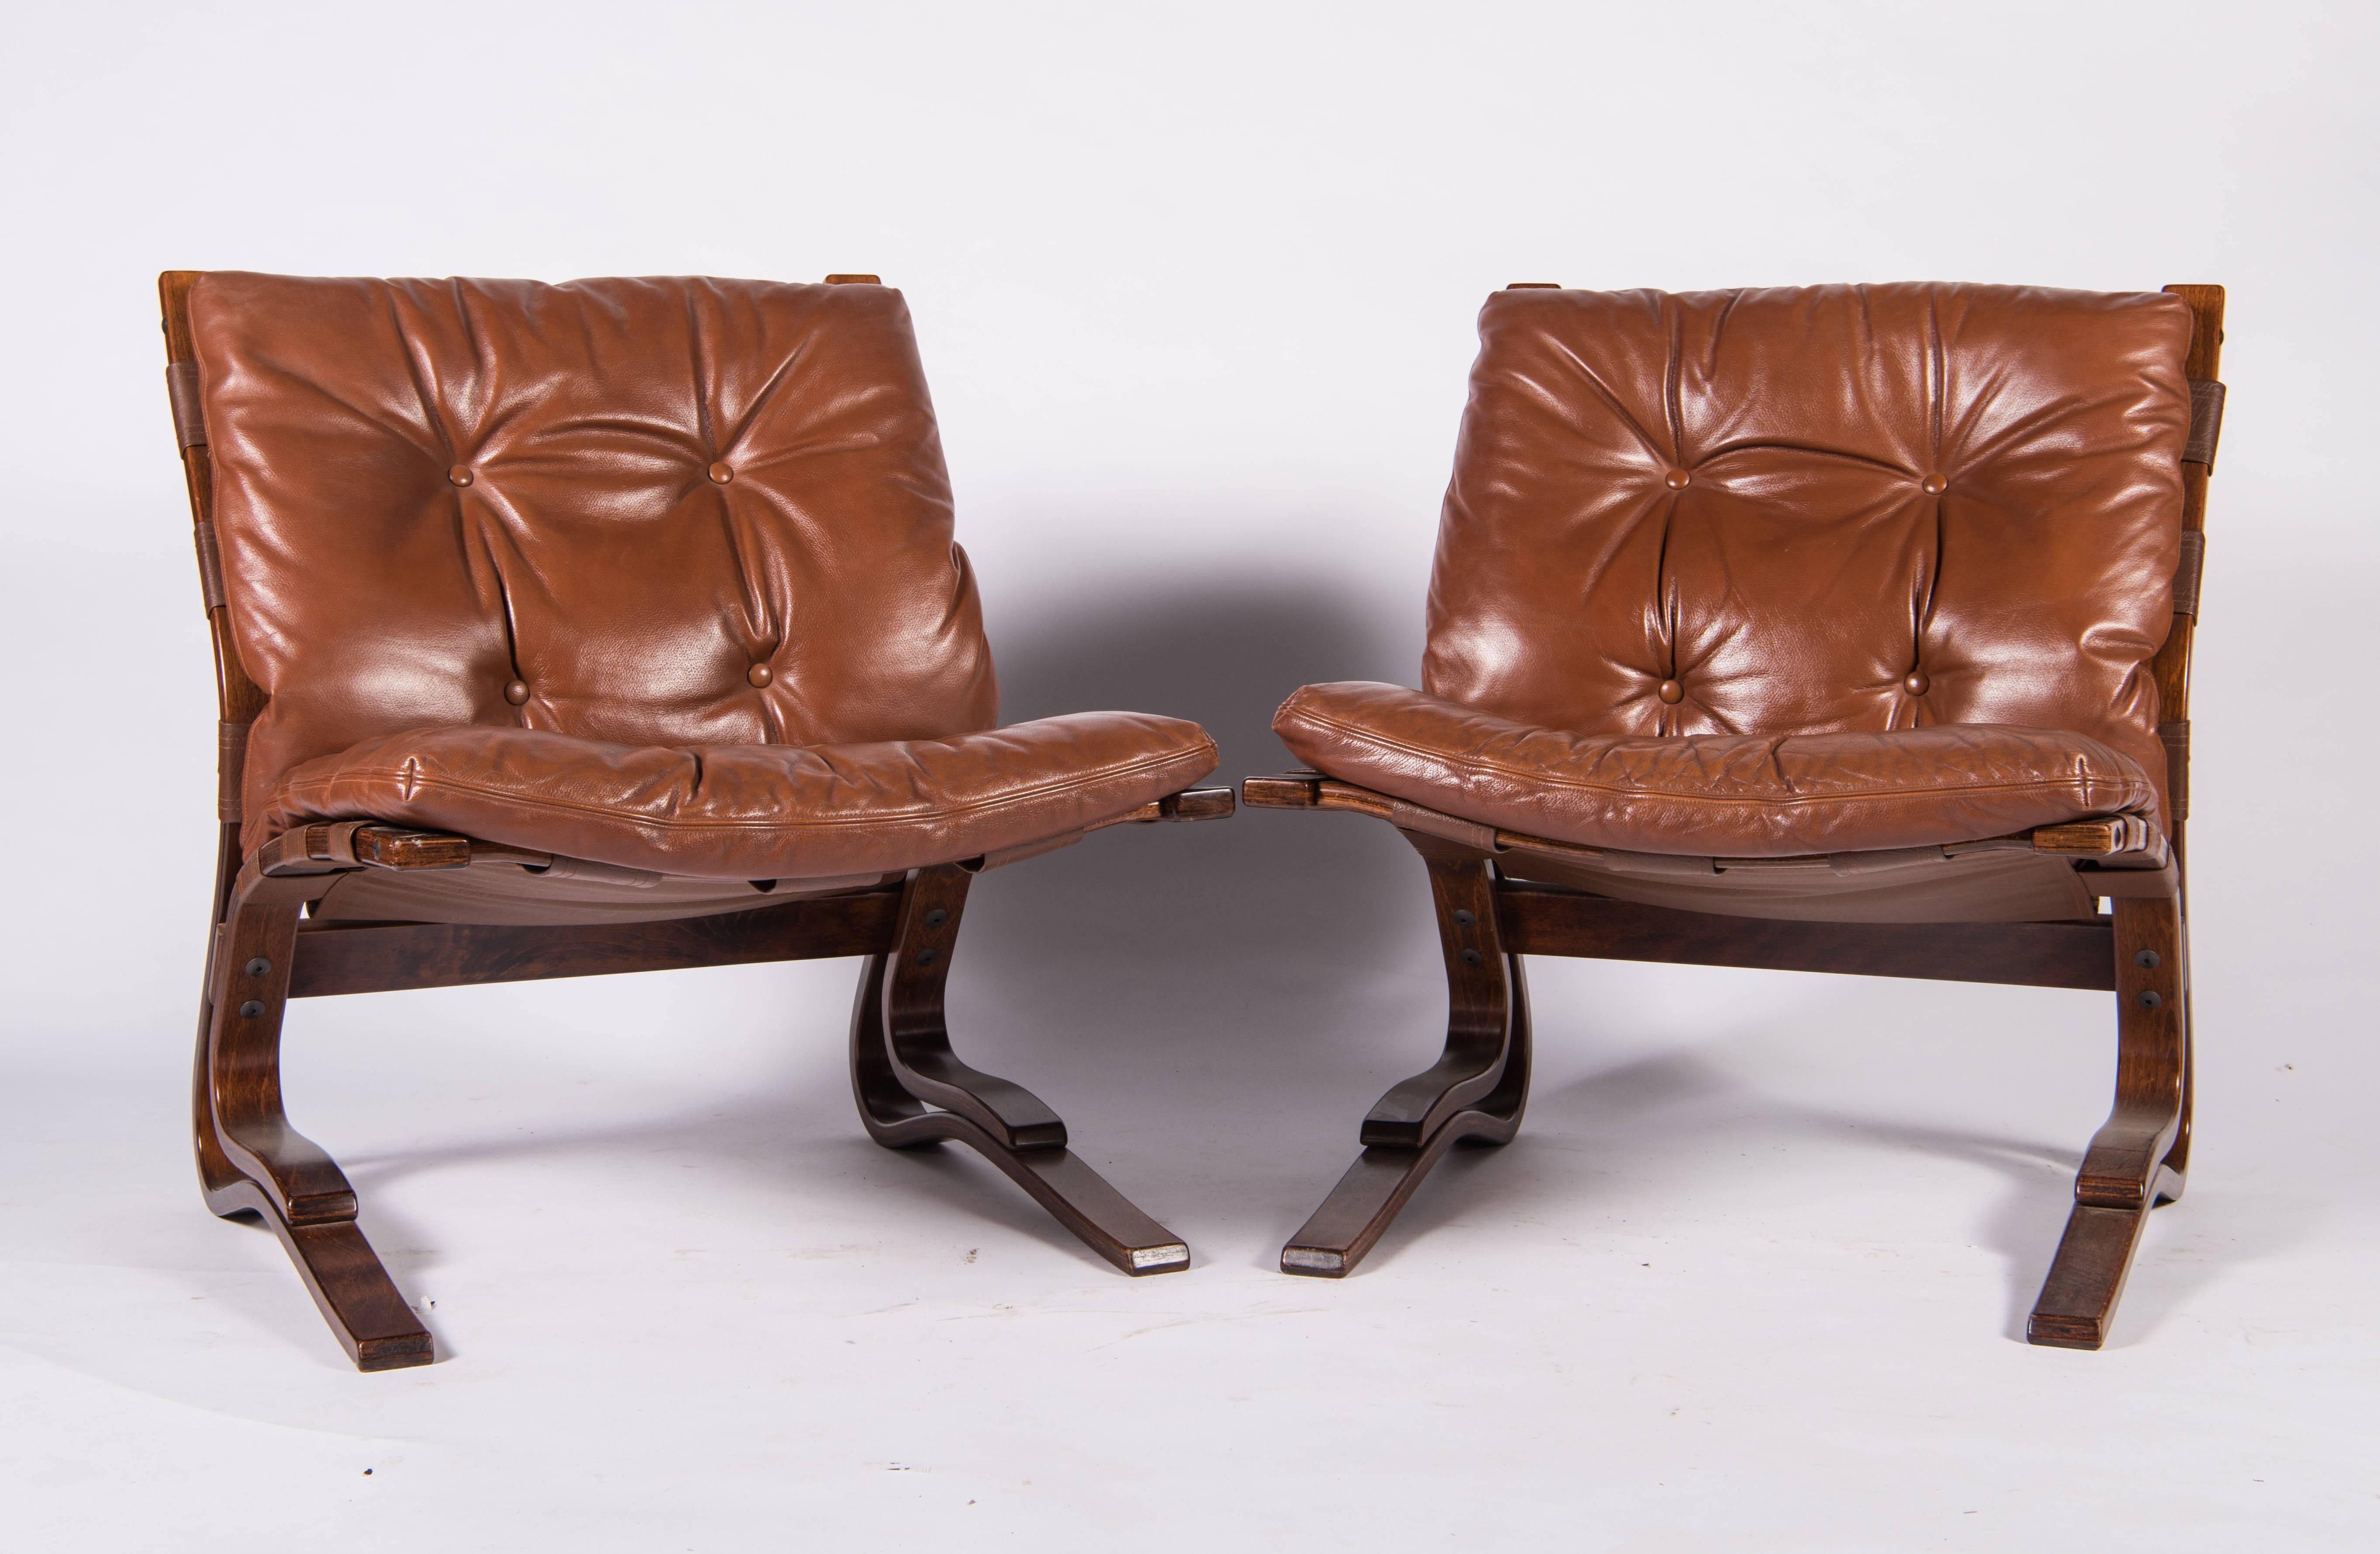 A pair of iconic cantilevered chairs of bent laminated rosewood with cushions of tufted brown leather by Elsa and Nordahl Solheim for Rykkin & Company of Norway. . The gentle 'flex' of the chair makes them exceedingly comfortable and their clean,